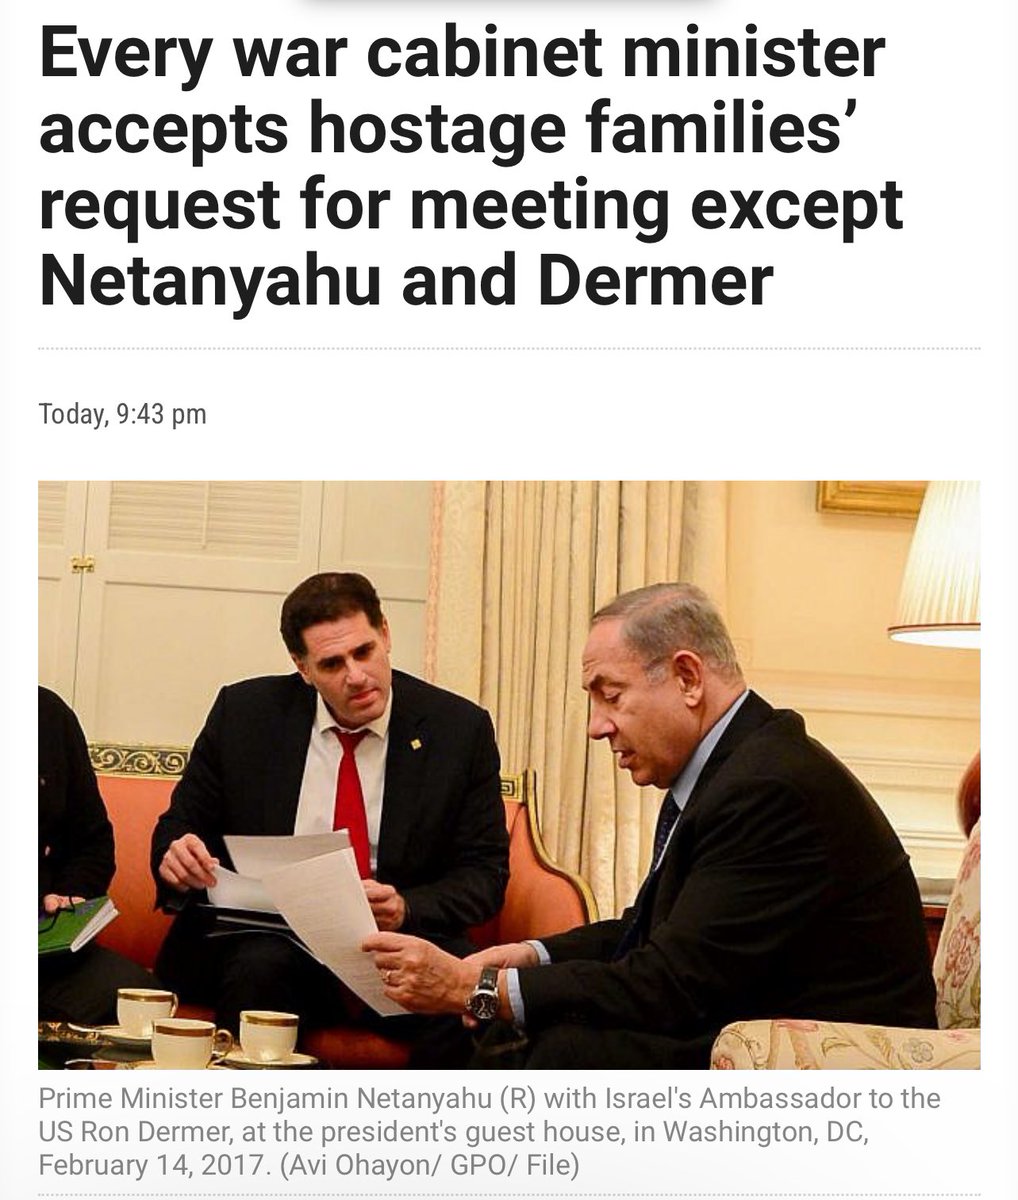 💥Profiles in Courage: Netanyahu & Ron Dermer refuse to meet families of hostages.